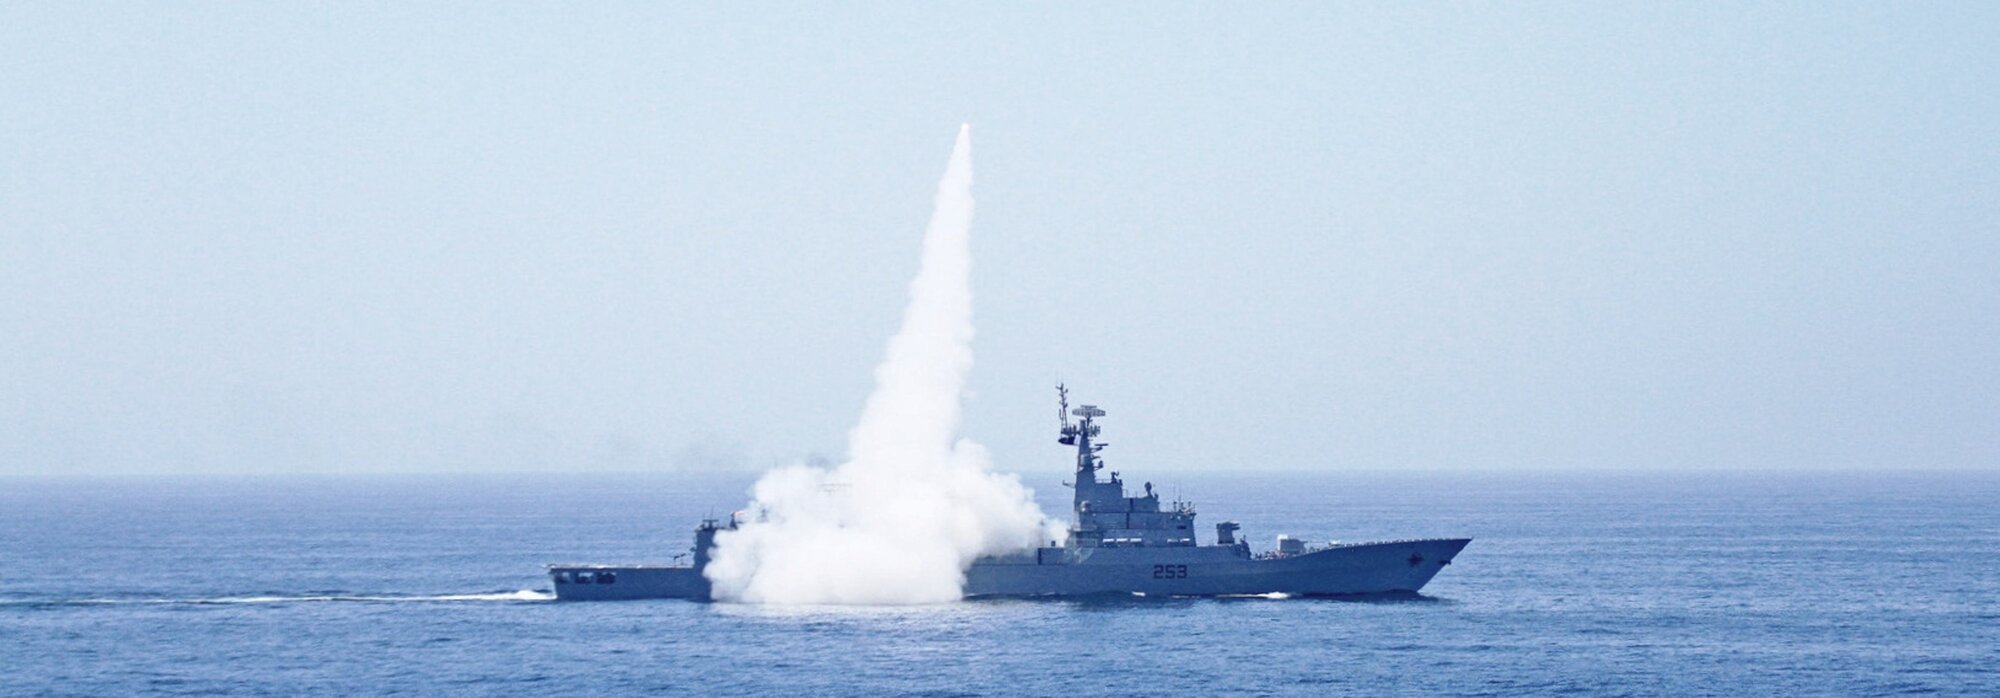 PNS SAIF-253 firings of C-802 (Surface to Surface Missile)e.jpg